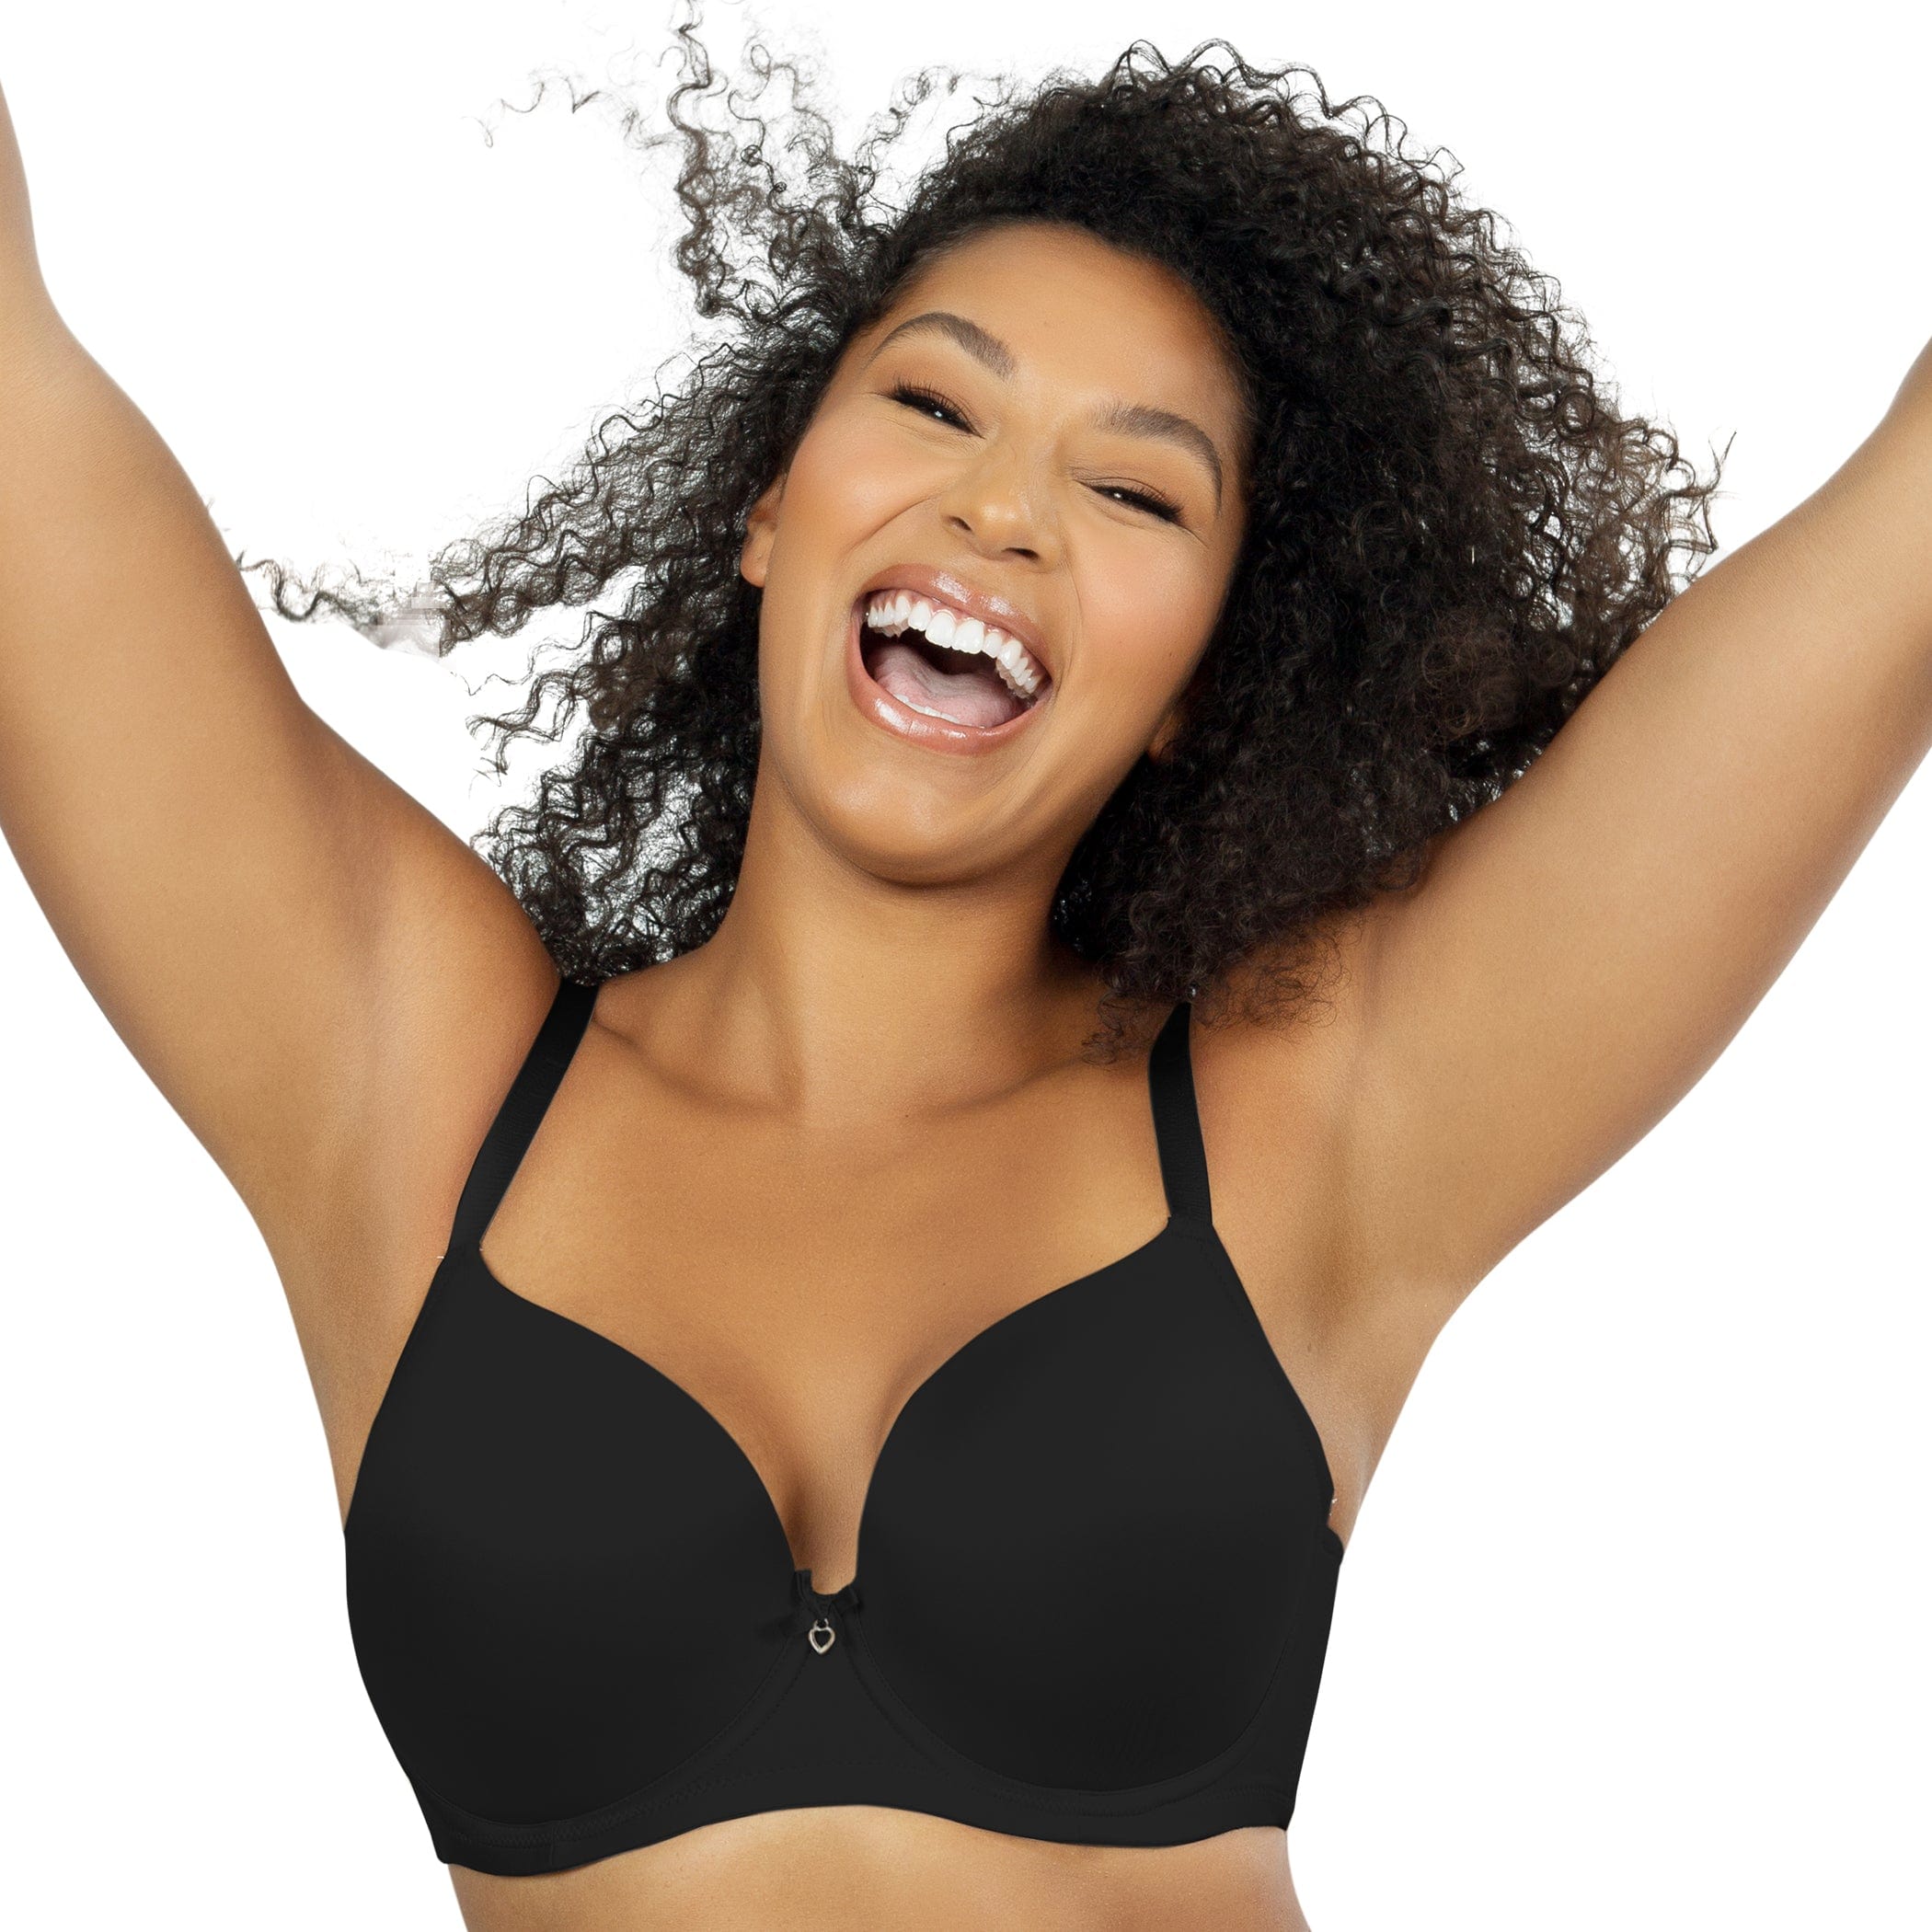 Underwire for Average Size Figure Types in 30G Bra Size F Cup Sizes  Moulded, Padded and Seamless Bras